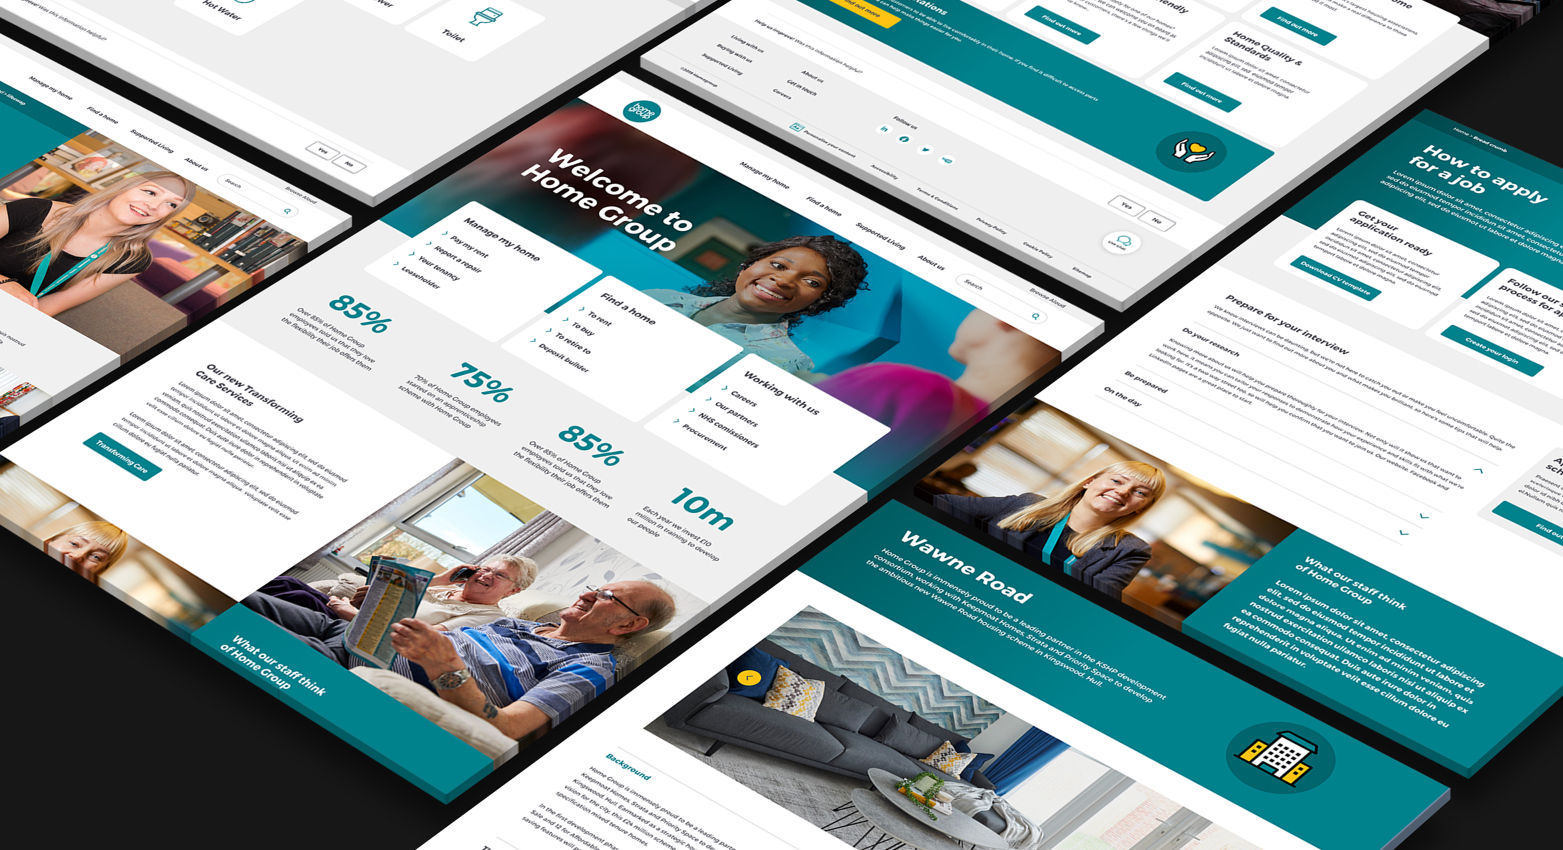 Mediaworks scoops Third Sector website gong for transformational Home Group project @mediaworksuk